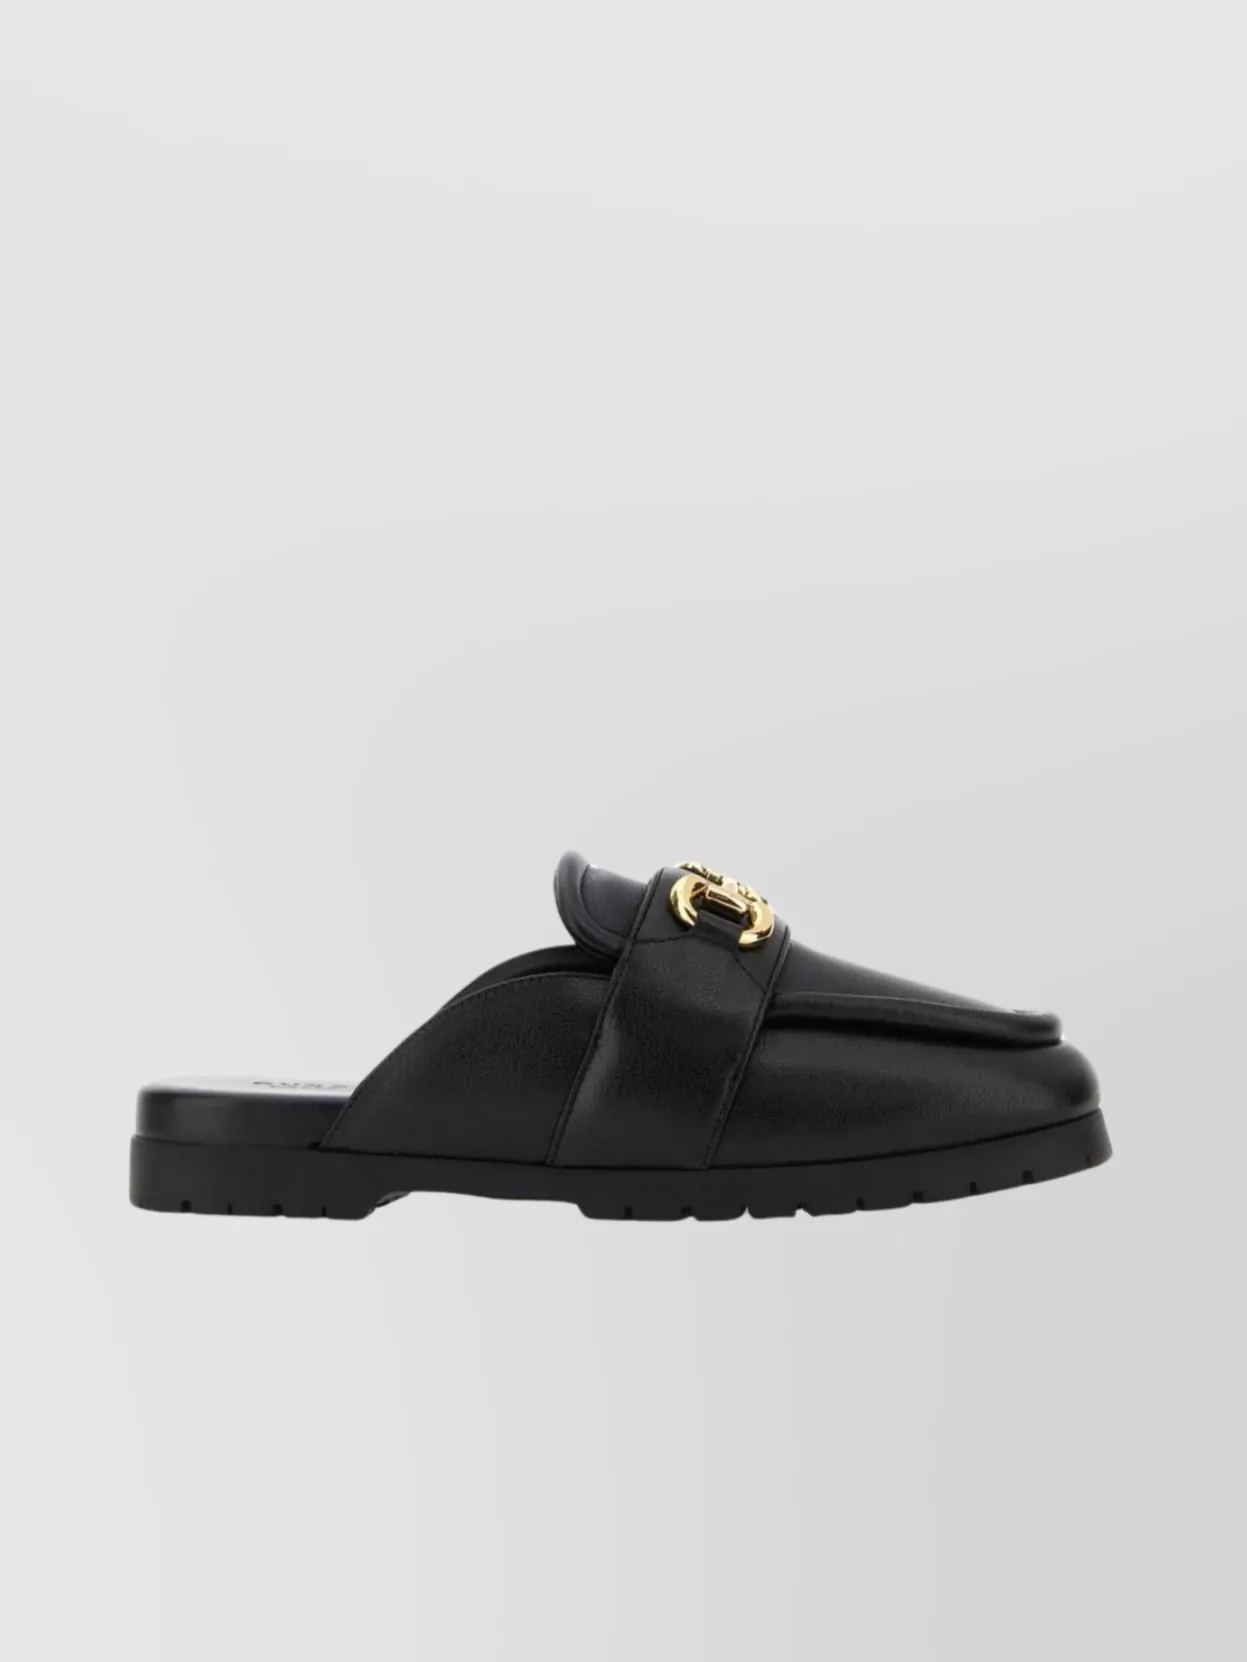 GUCCI LEATHER SLIDE SANDALS WITH HORSEBIT DETAIL